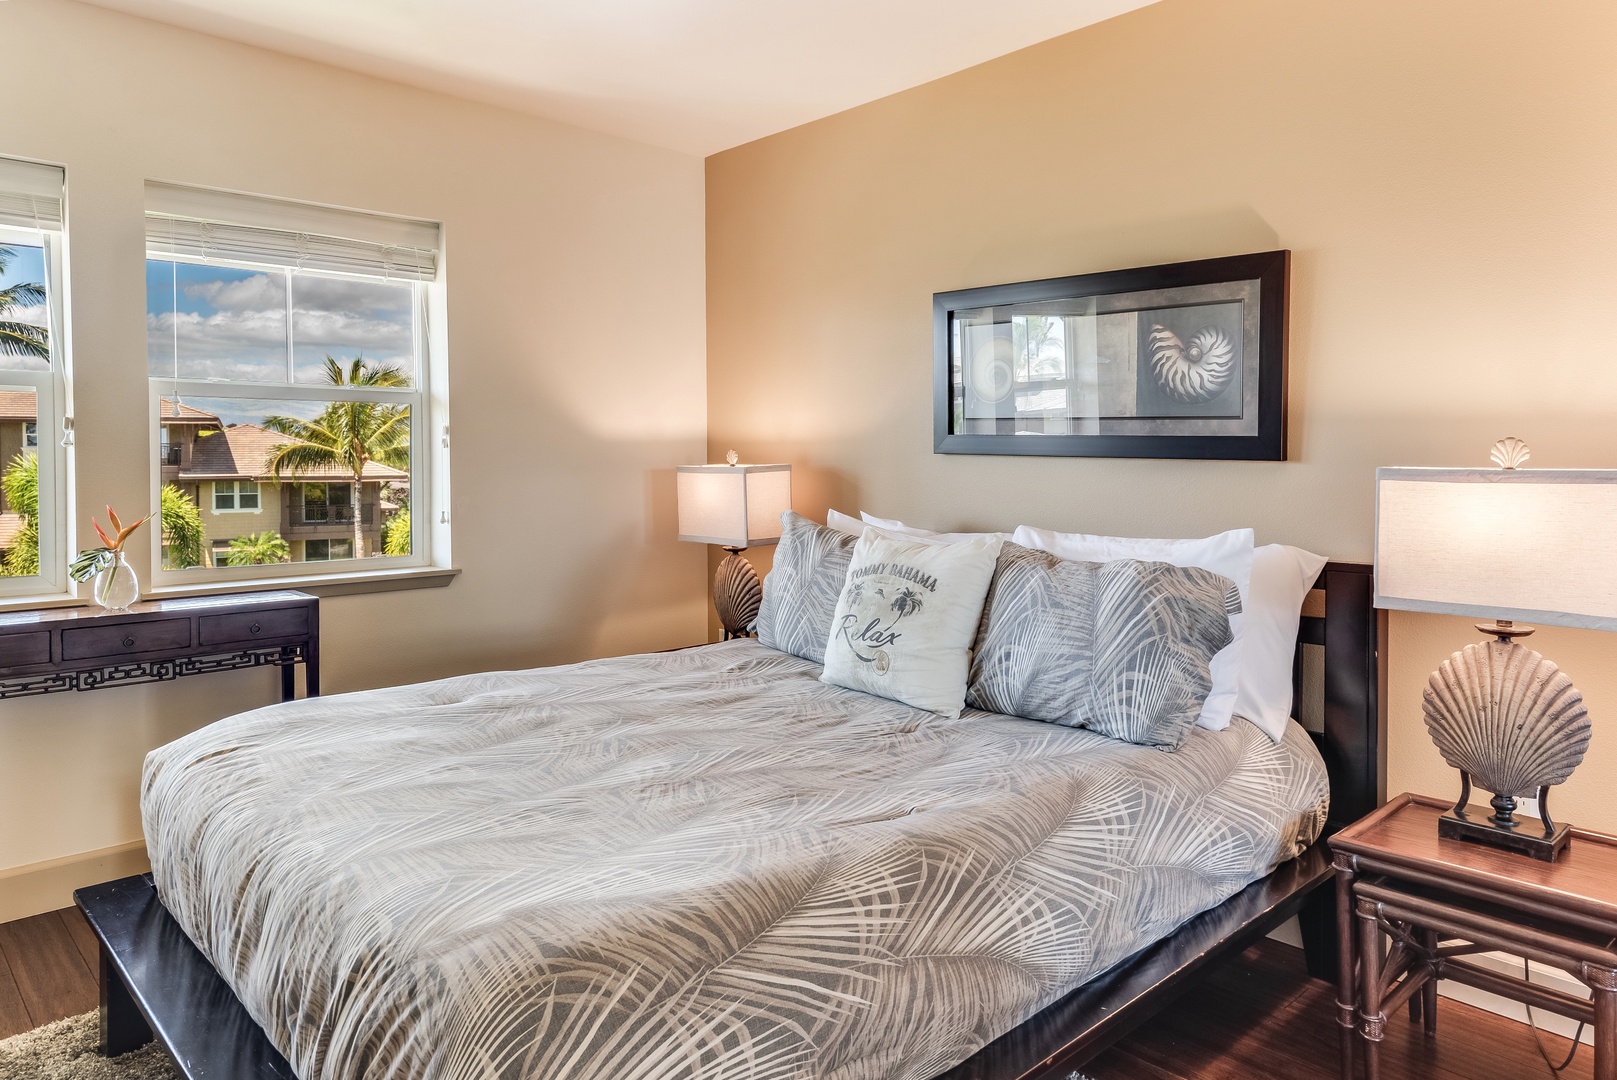 Waikoloa Vacation Rentals, 3BD Hali'i Kai (12G) at Waikoloa Resort - Upstairs guest bedroom 2 w/ queen size bed